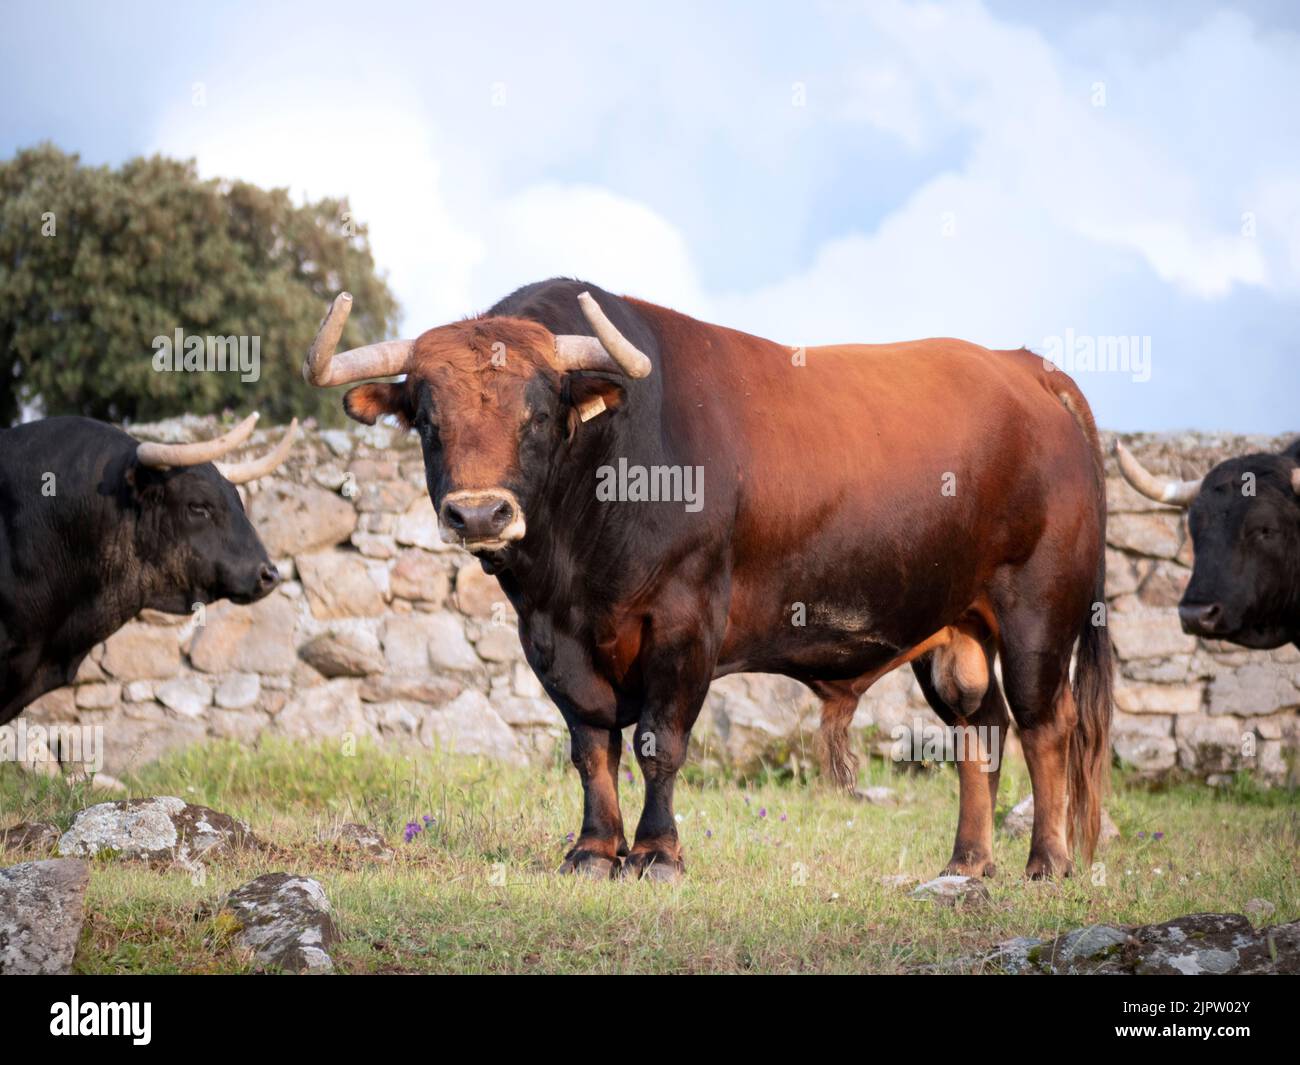 Red coloured spanish bull looking at camera. Old stone wall in the background. Stock Photo